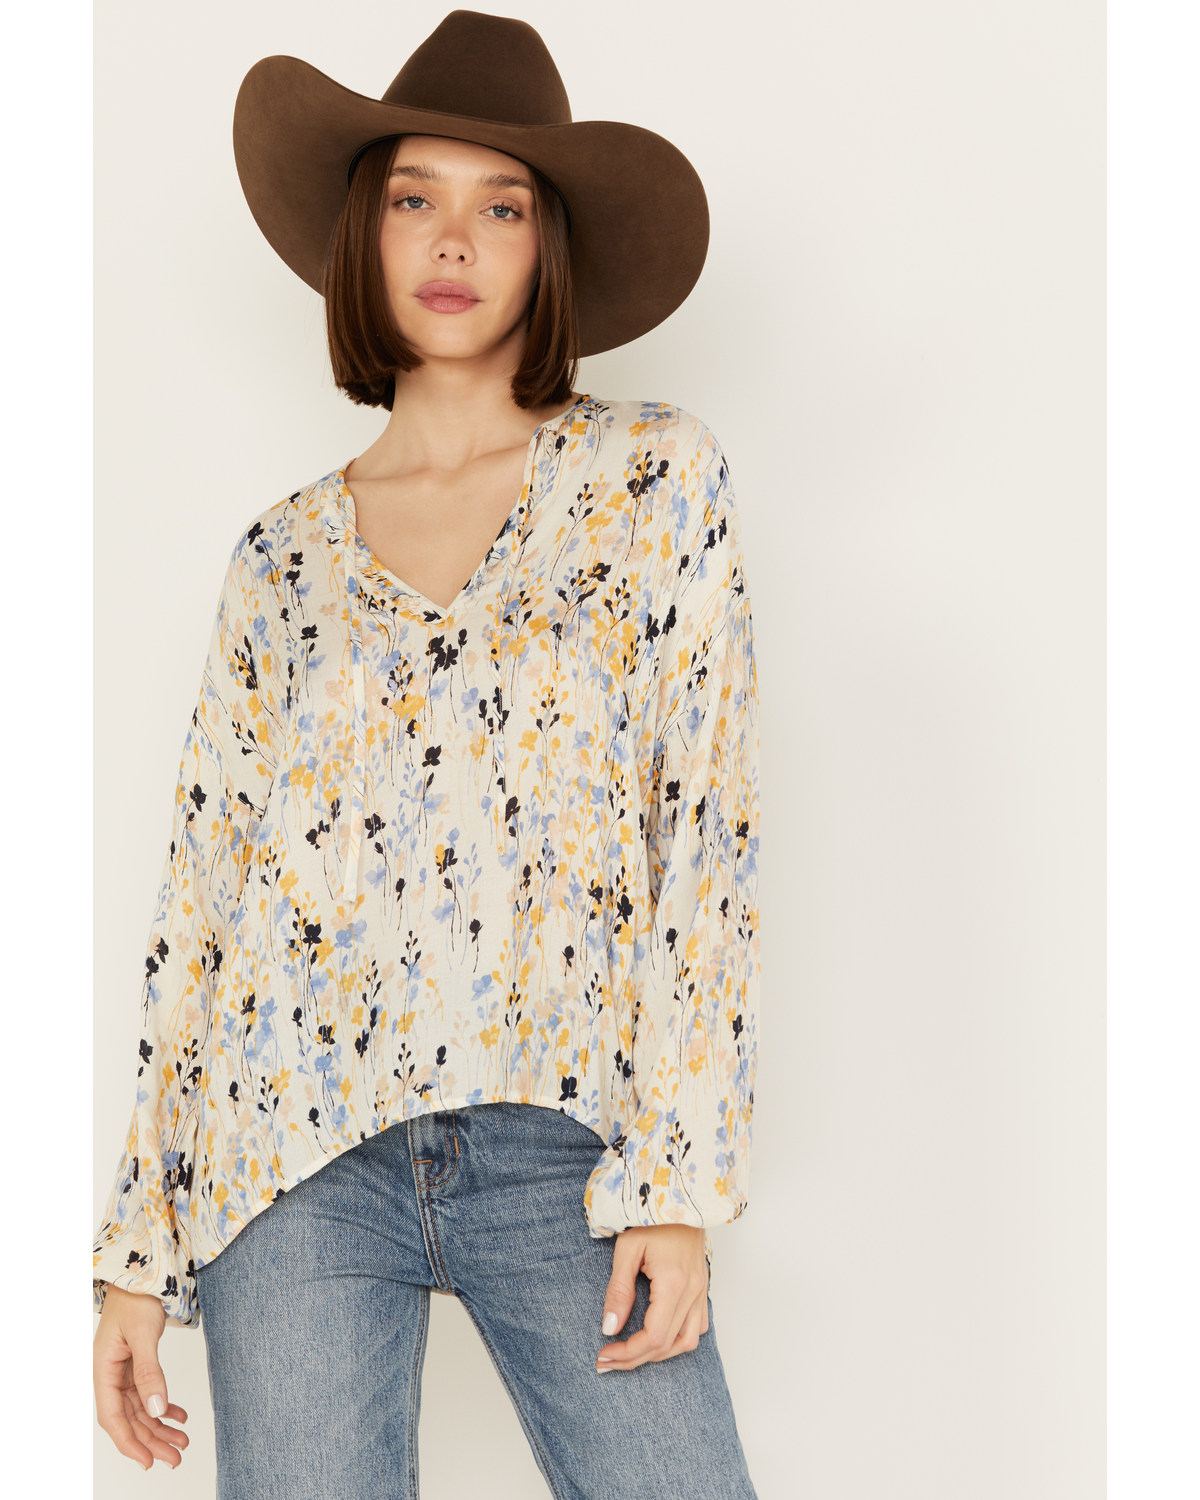 Cleo + Wolf Women's Crepe Rayon Printed Blouse